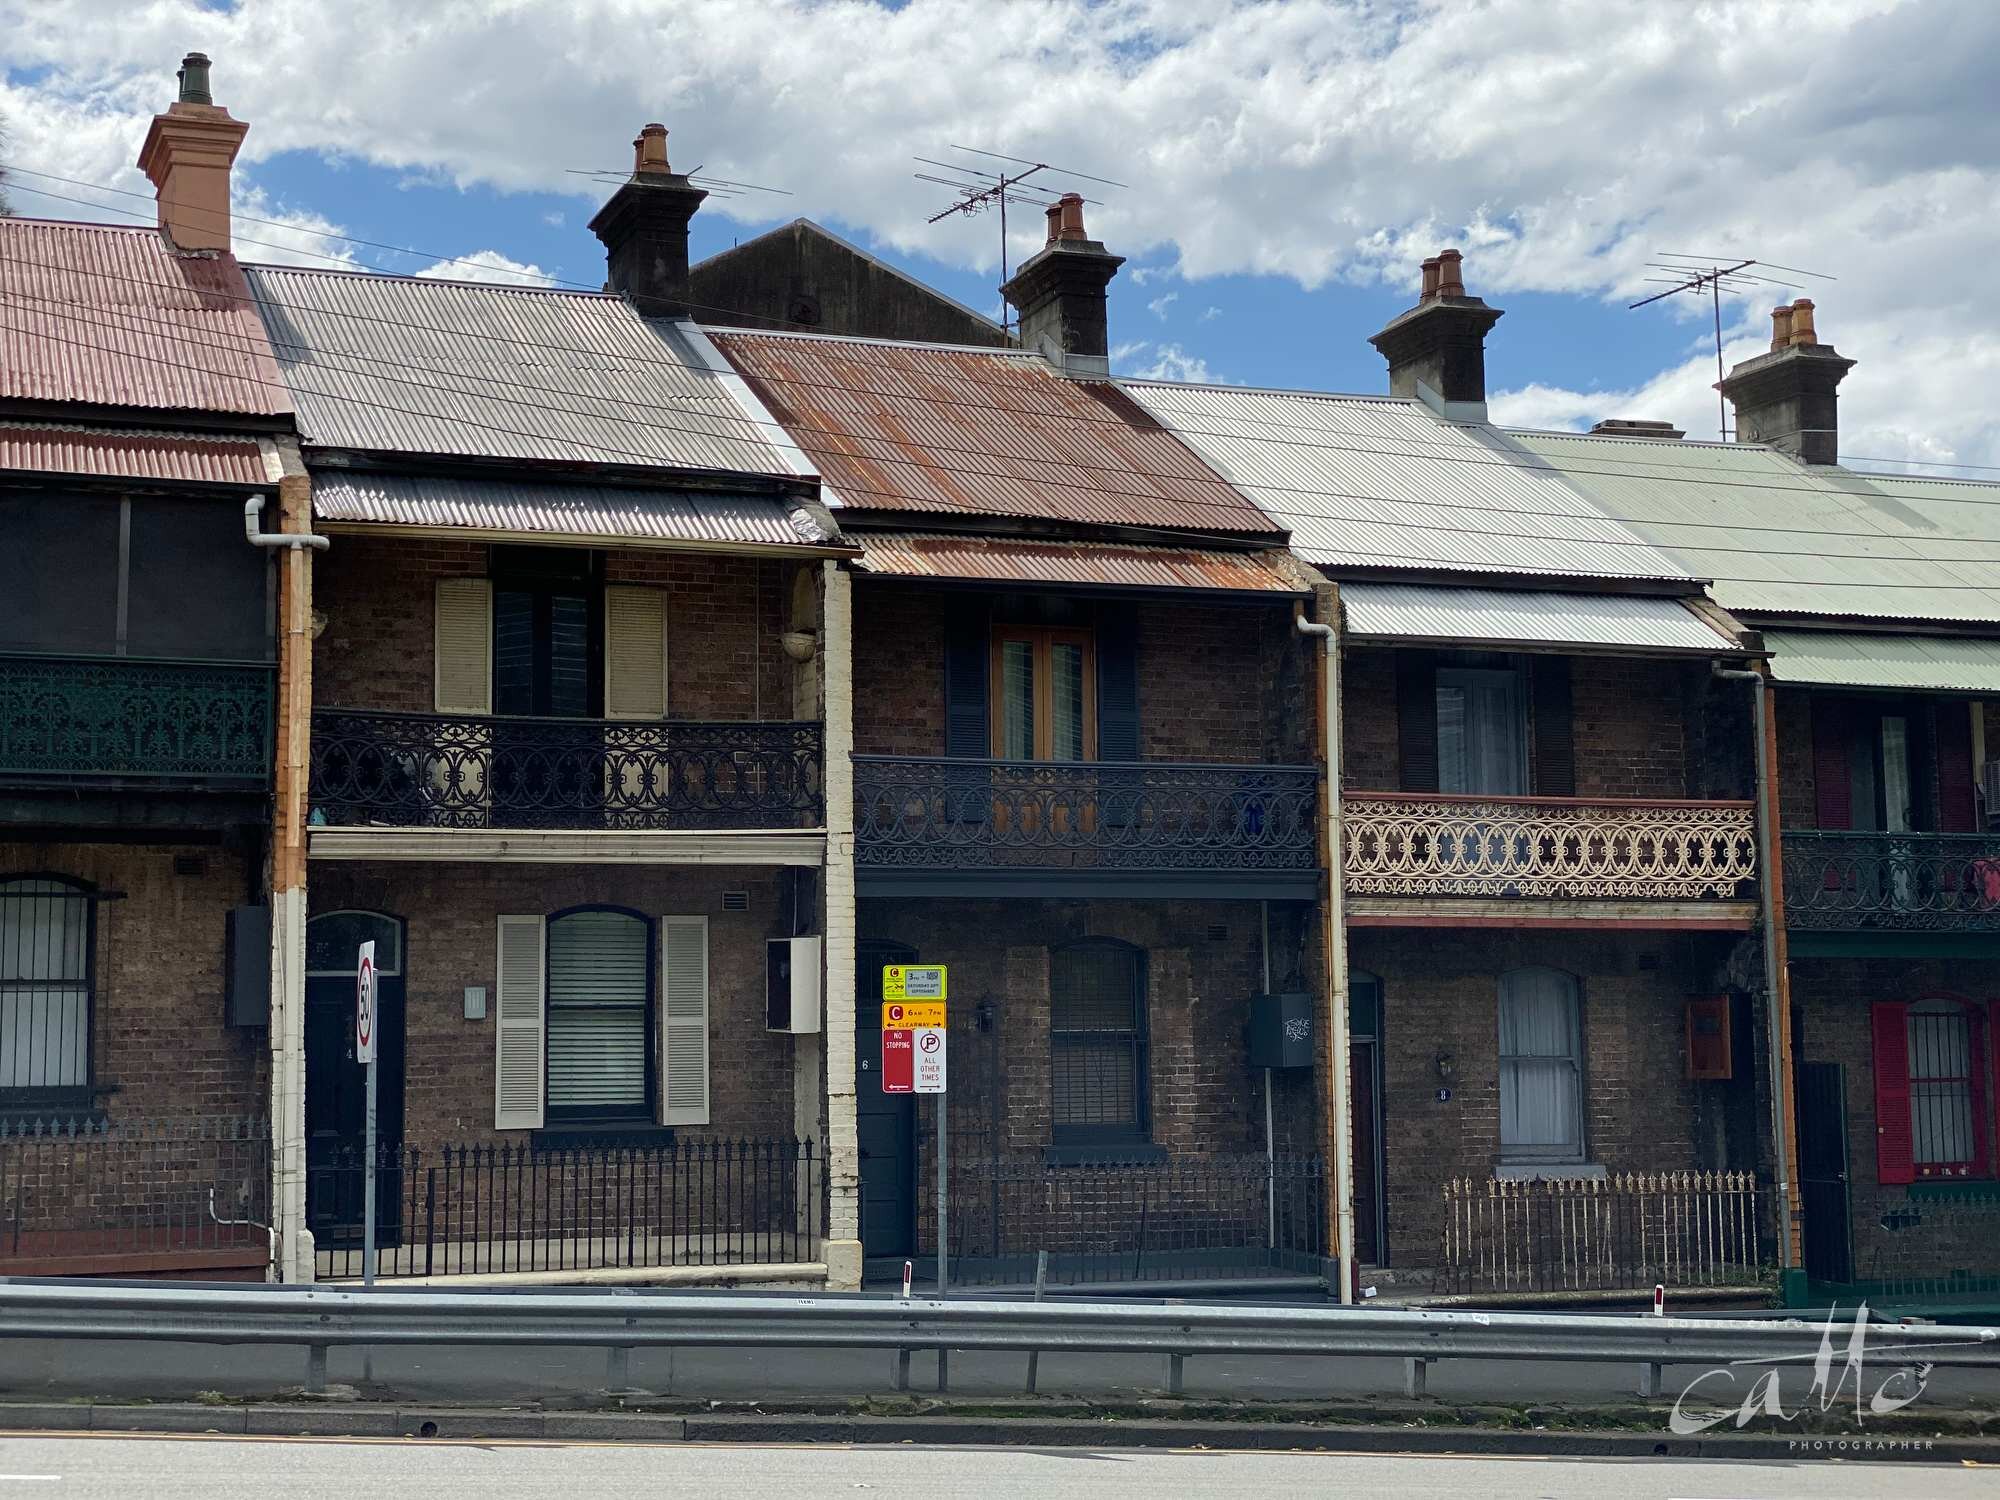 Cleveland St, Chippendale (iPhone 11 Pro - 2x zoom lens)